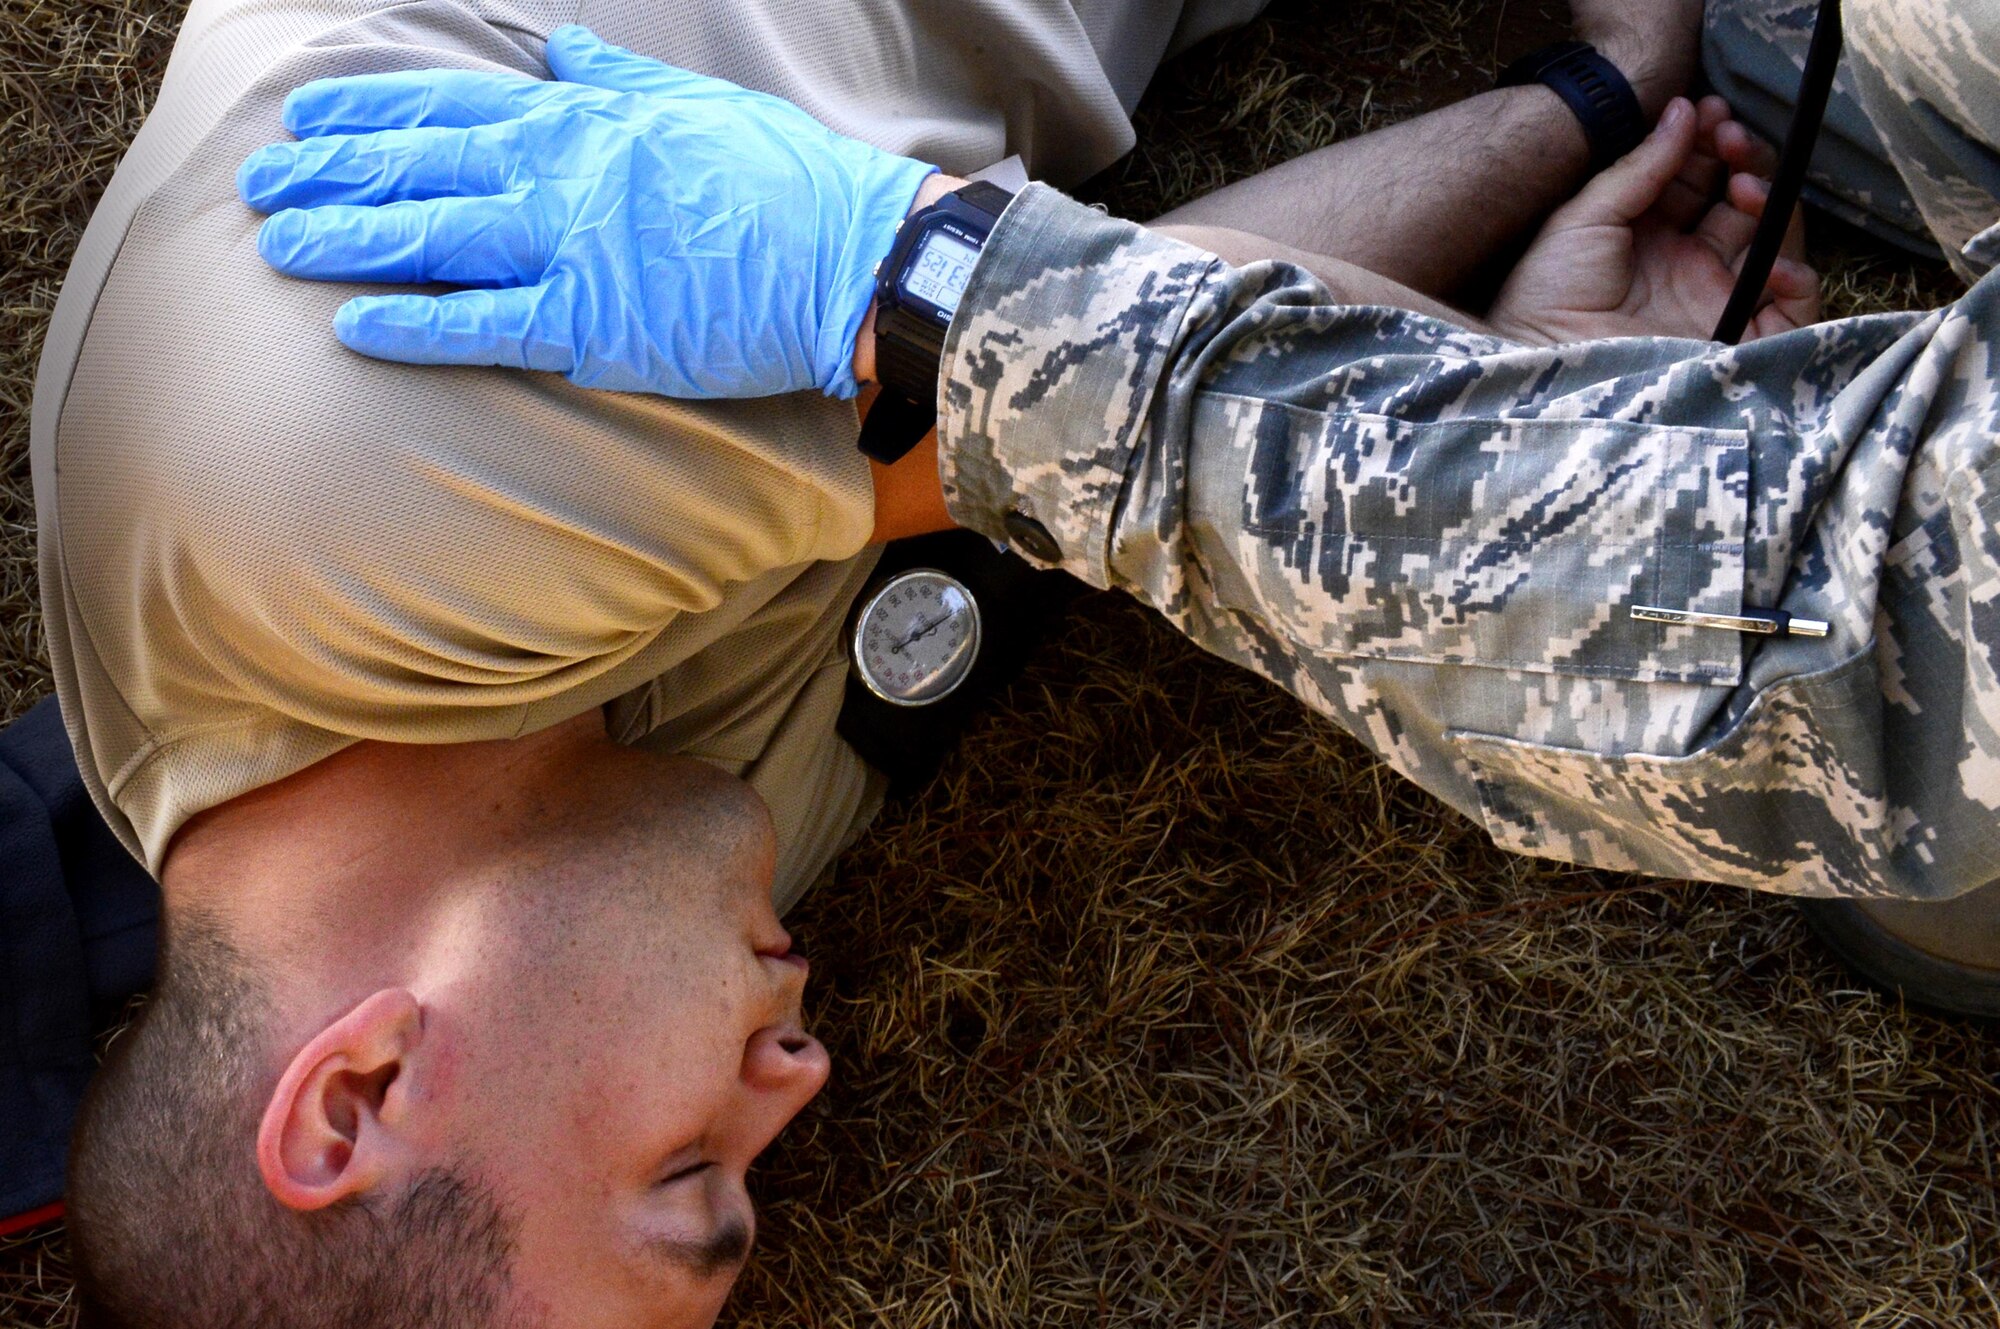 Emergency medical technicians assigned to Minot Air Force Base, N.D., treat a patient in a simulated hyperthermia scenario during the 2016 EMT Rodeo Aug. 26, 2016 at Cannon Air Force Base, N.M. Cannon’s EMT Rodeo tests the skills of medical professionals from across the Air Force through a series of innovative, high-pressure scenarios. (U.S. Air Force photo by Tech. Sgt. Manuel J. Martinez)